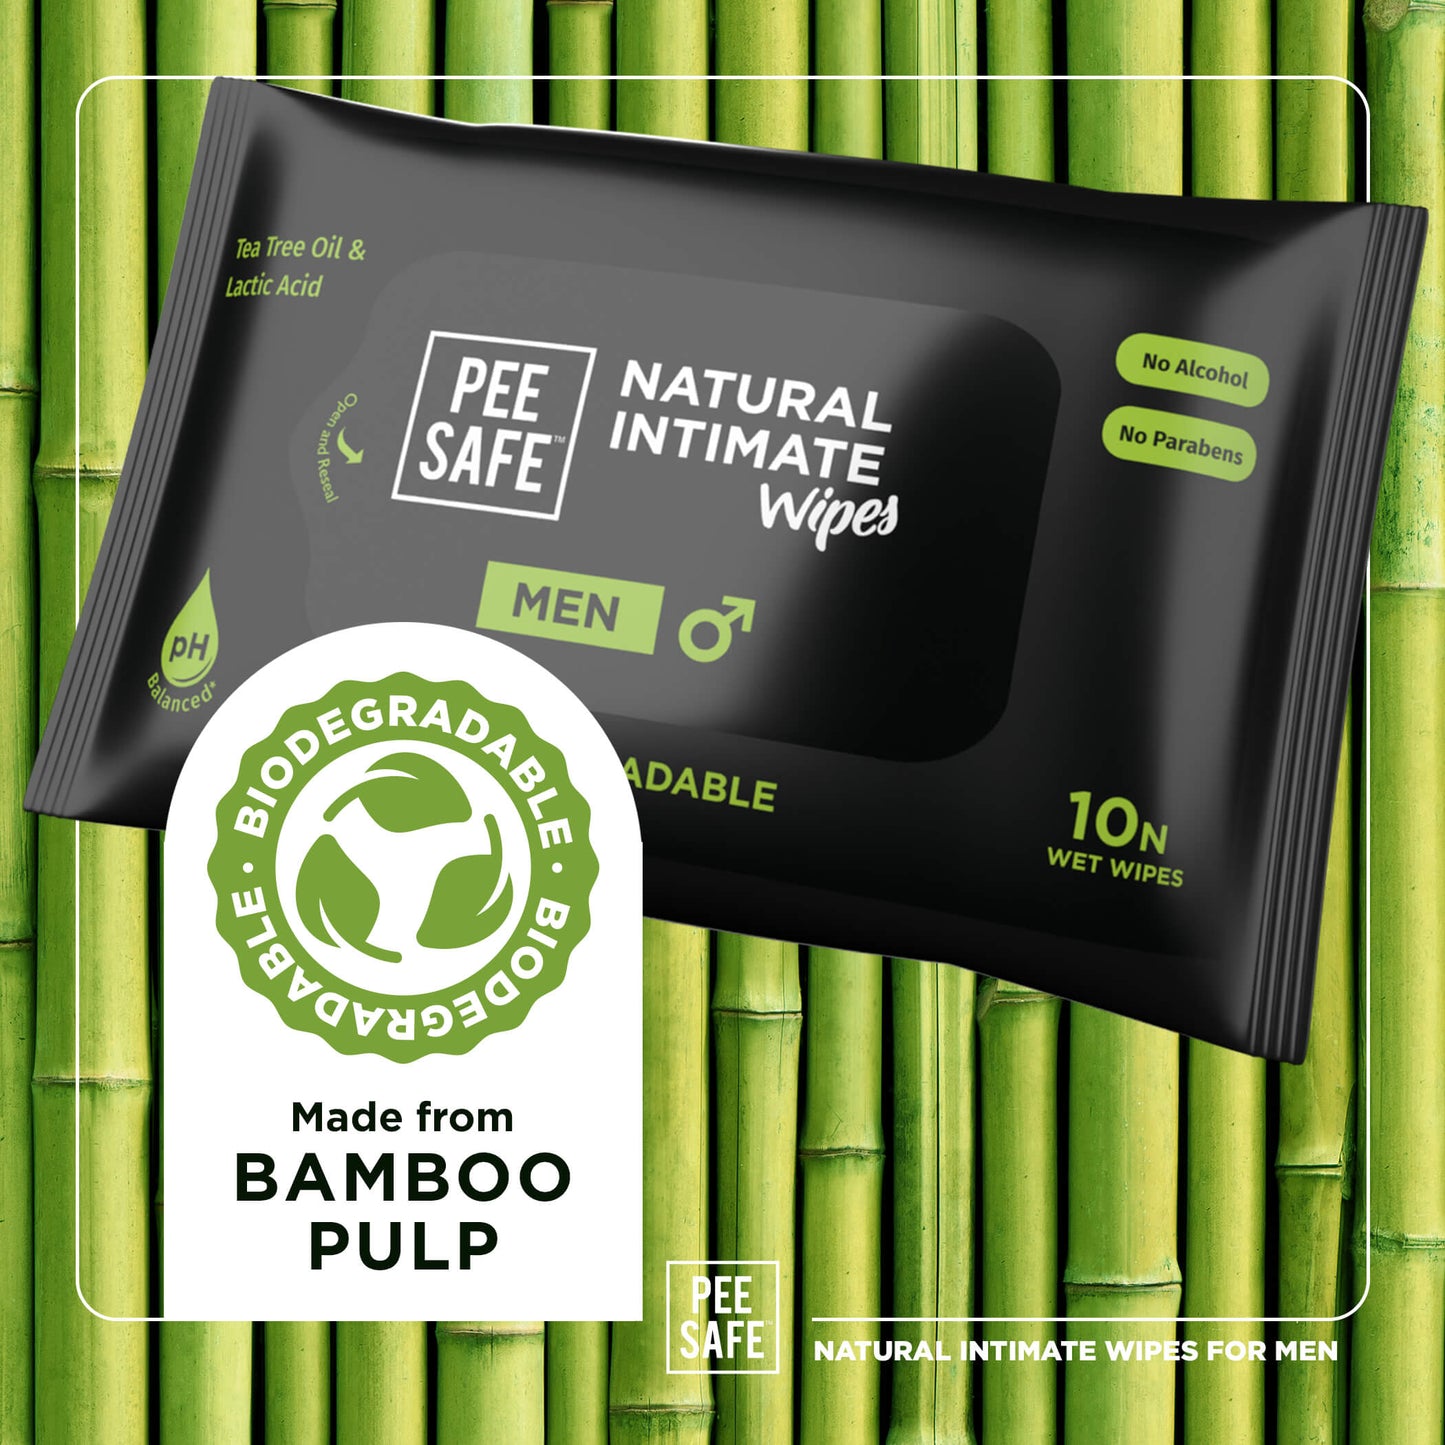 
                  
                    Pee Safe Biodegradable Intimate Wipes for Men (10 Wipes)
                  
                